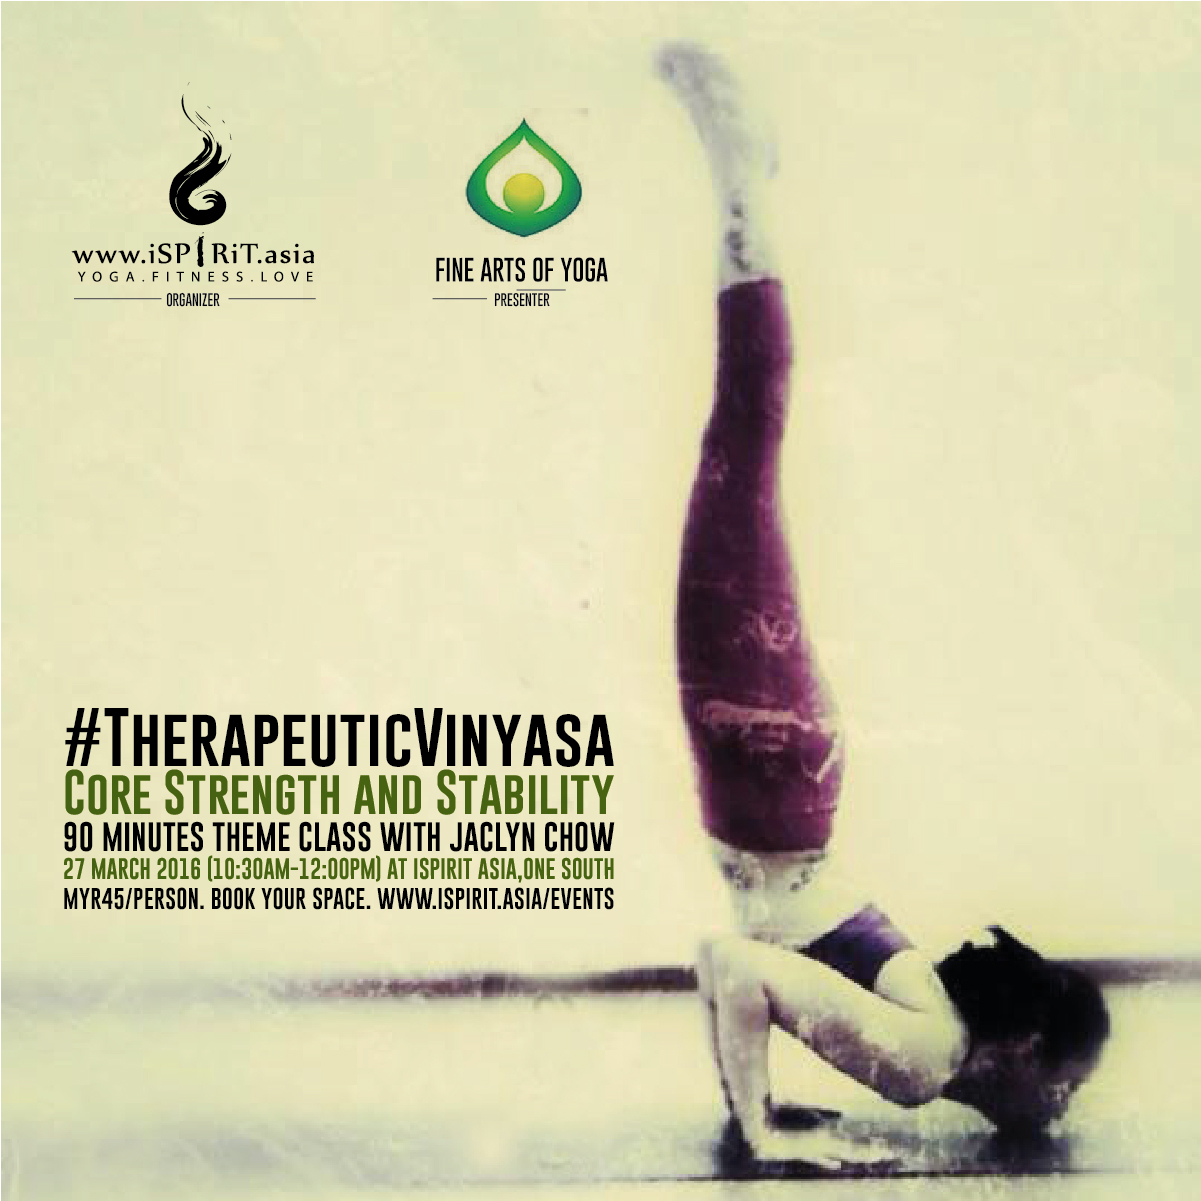 Therapeutic Vinyasa Core strength with Jaclyn Chow